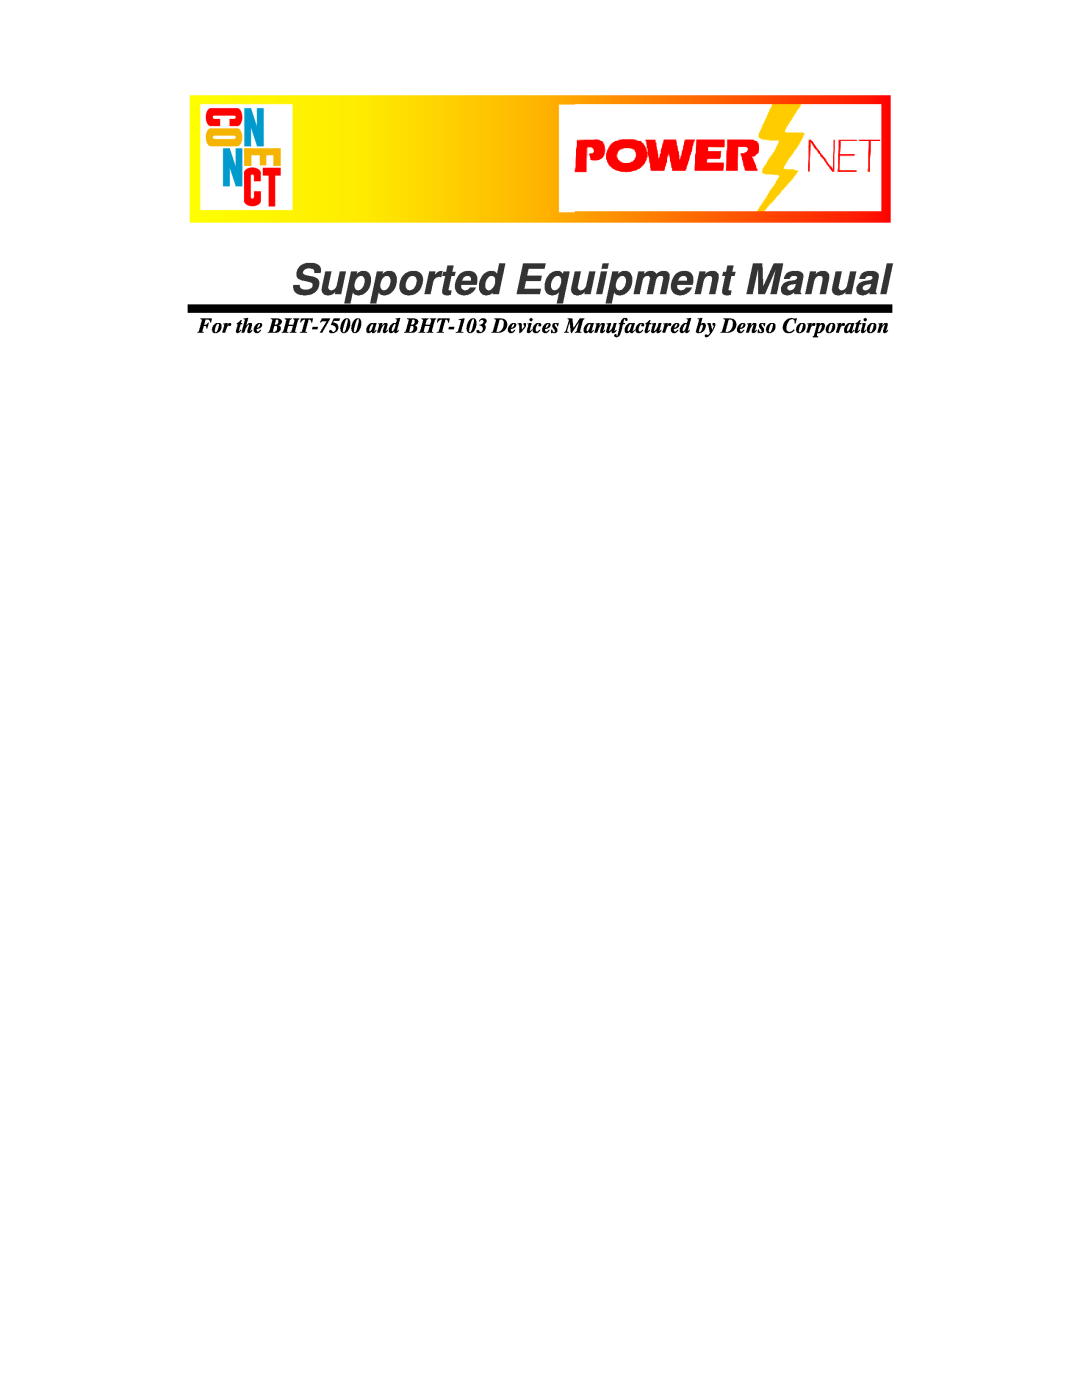 Denso BHT-103, BHT-7500 manual Supported Equipment Manual 